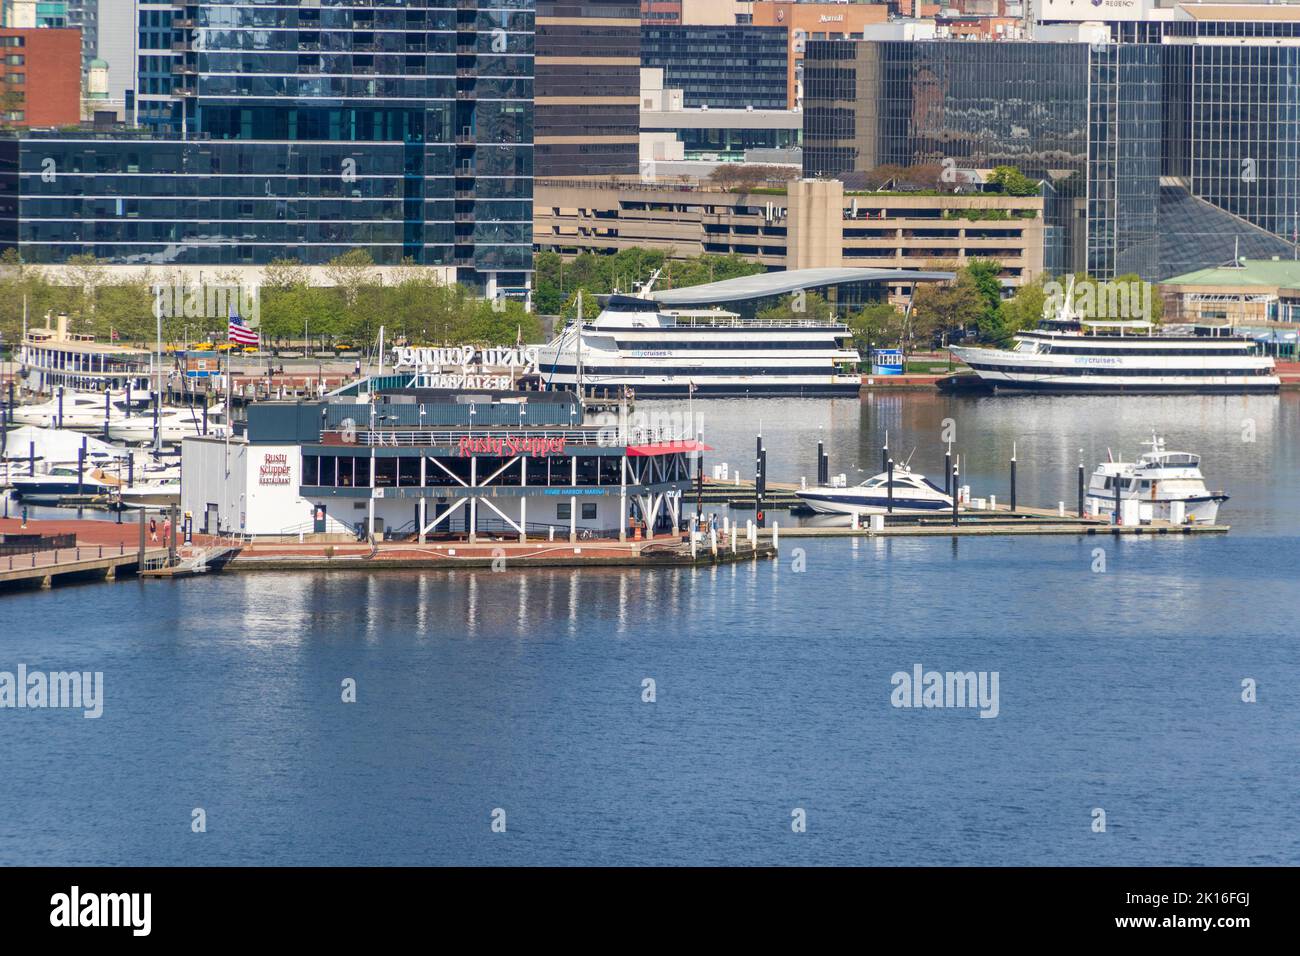 Rusty Scupper Marina and Restaurant in Baltimore Inner Harbor, Baltimore, Maryland. Stock Photo